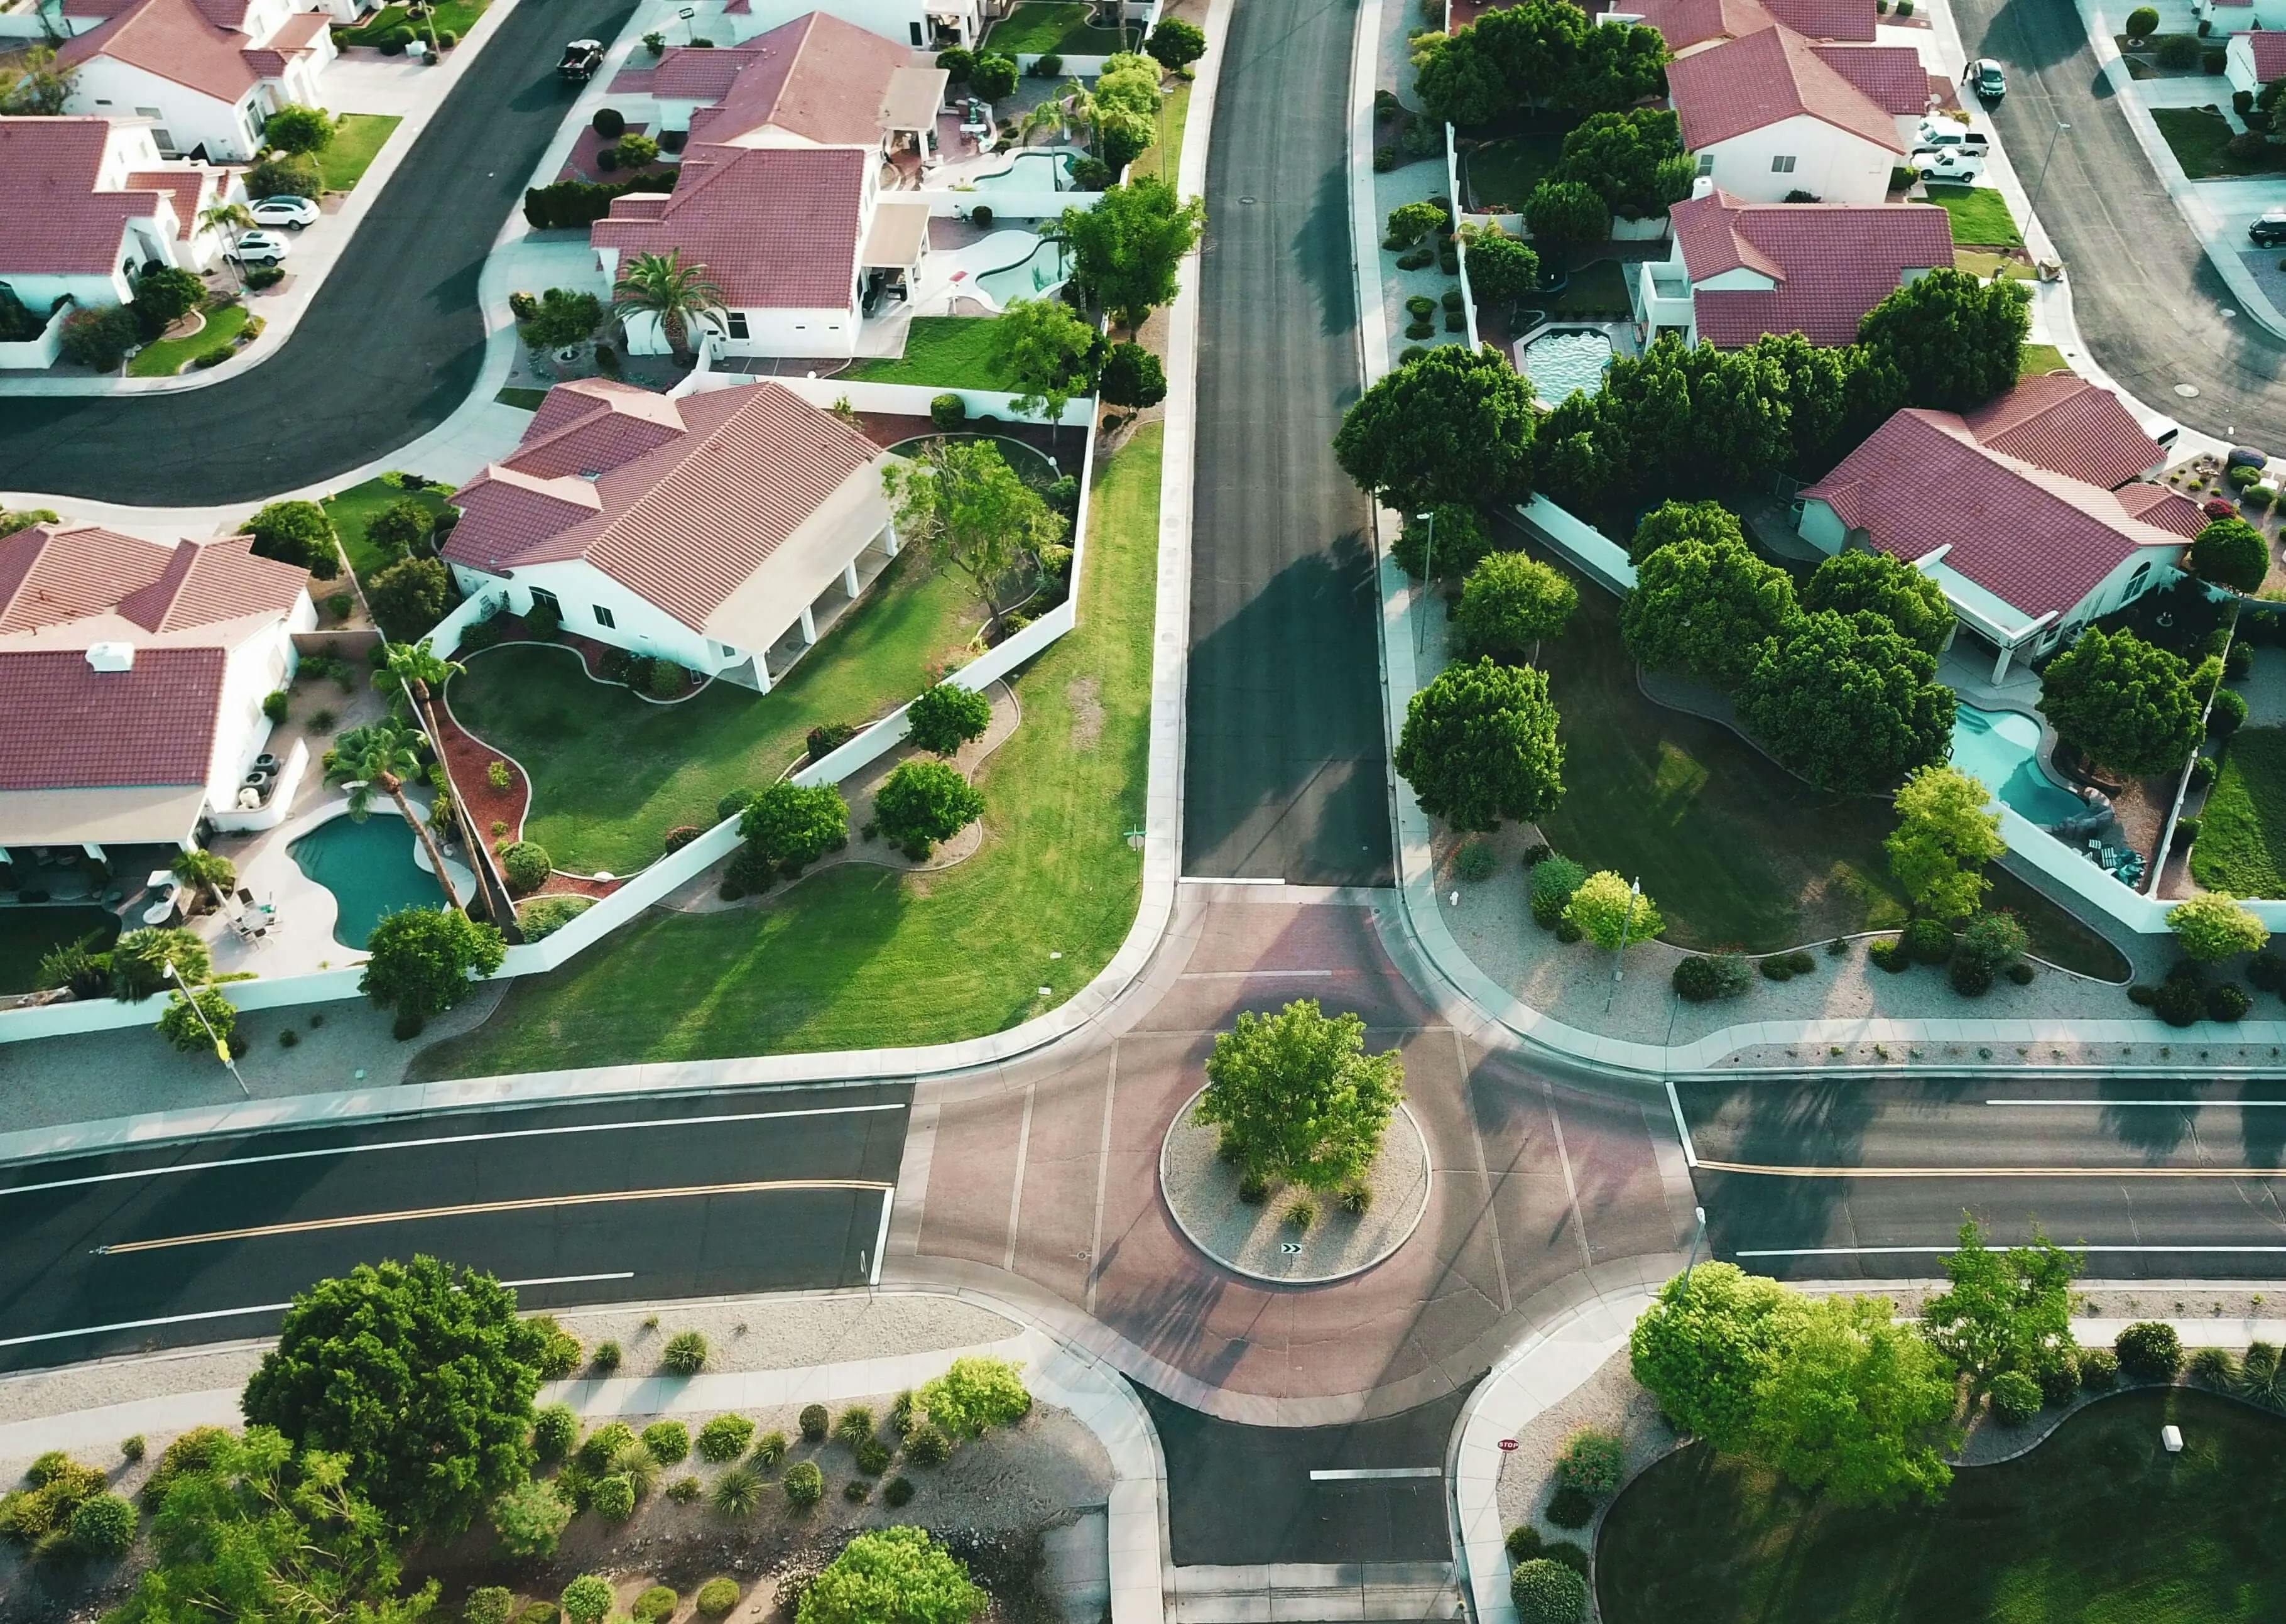 A roundabout at the middle of a residential area.